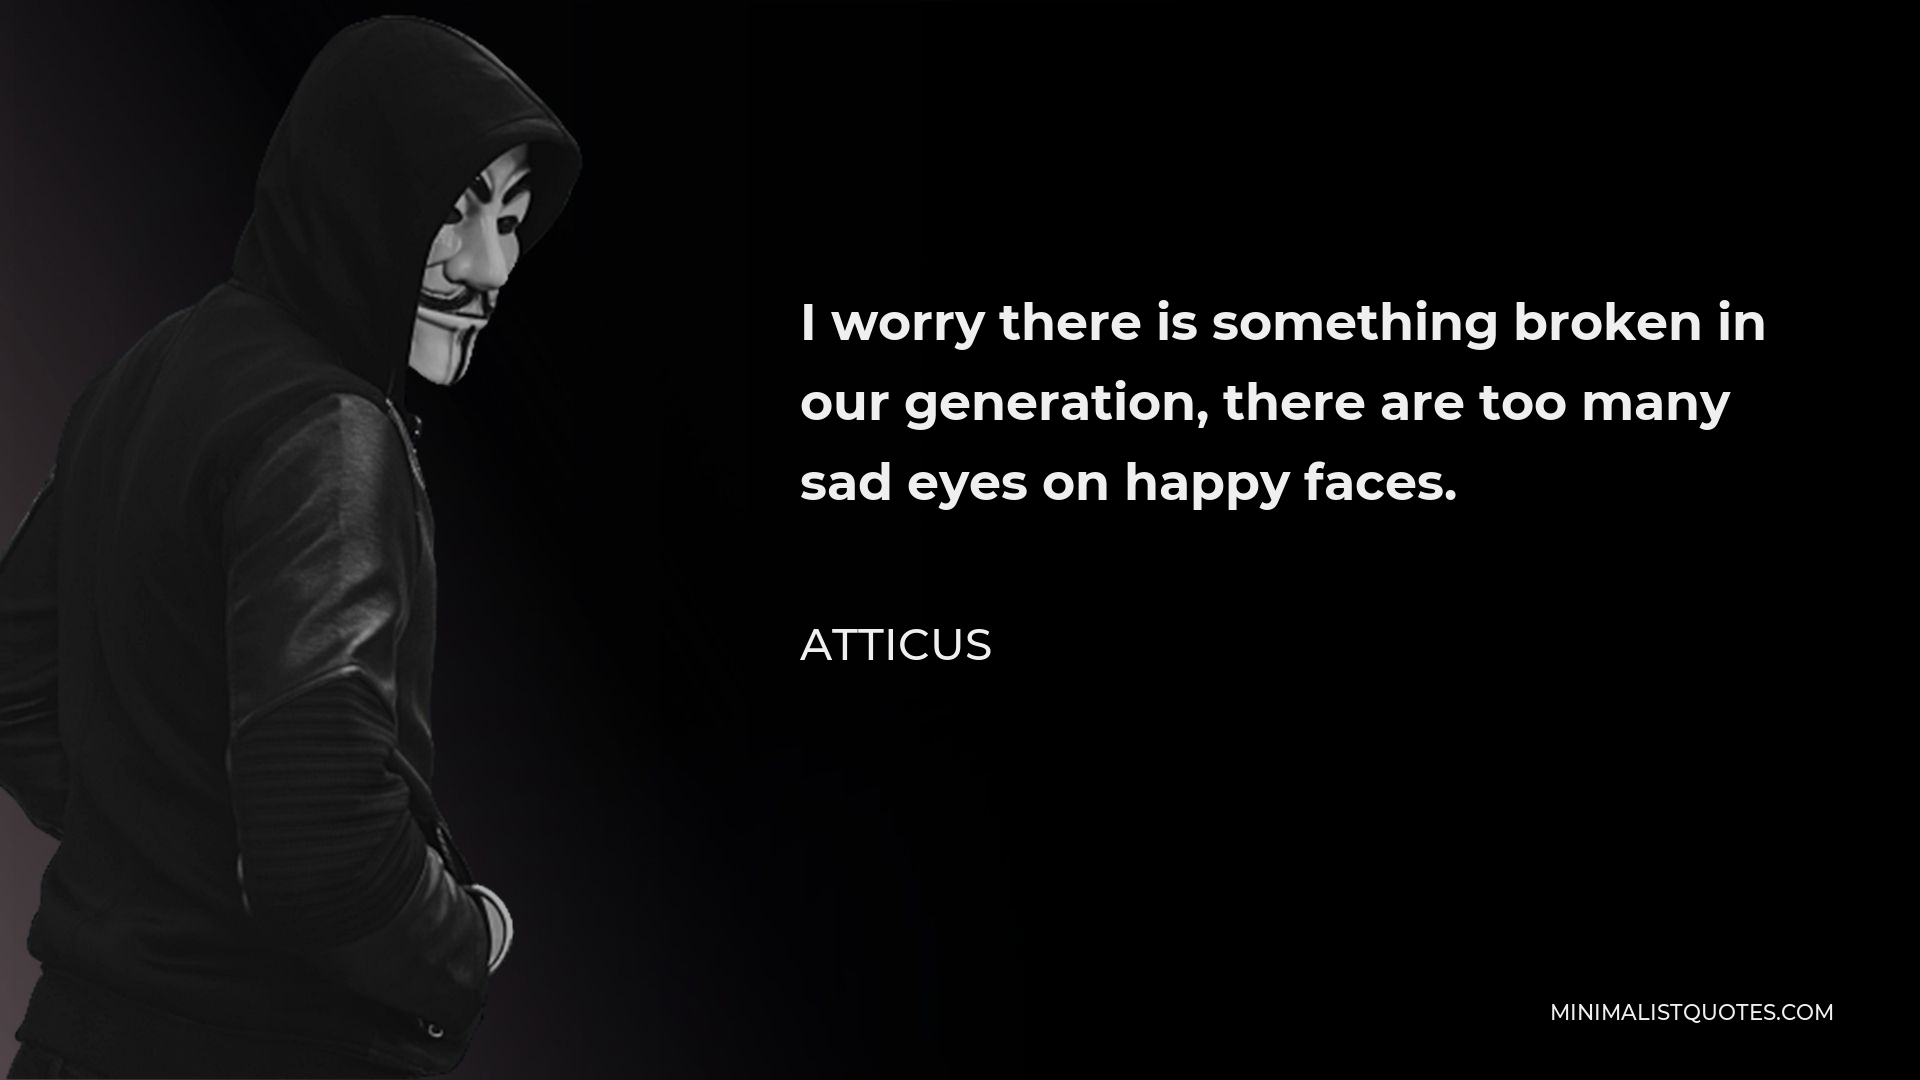 Atticus Quote - I worry there is something broken in our generation, there are too many sad eyes on happy faces.